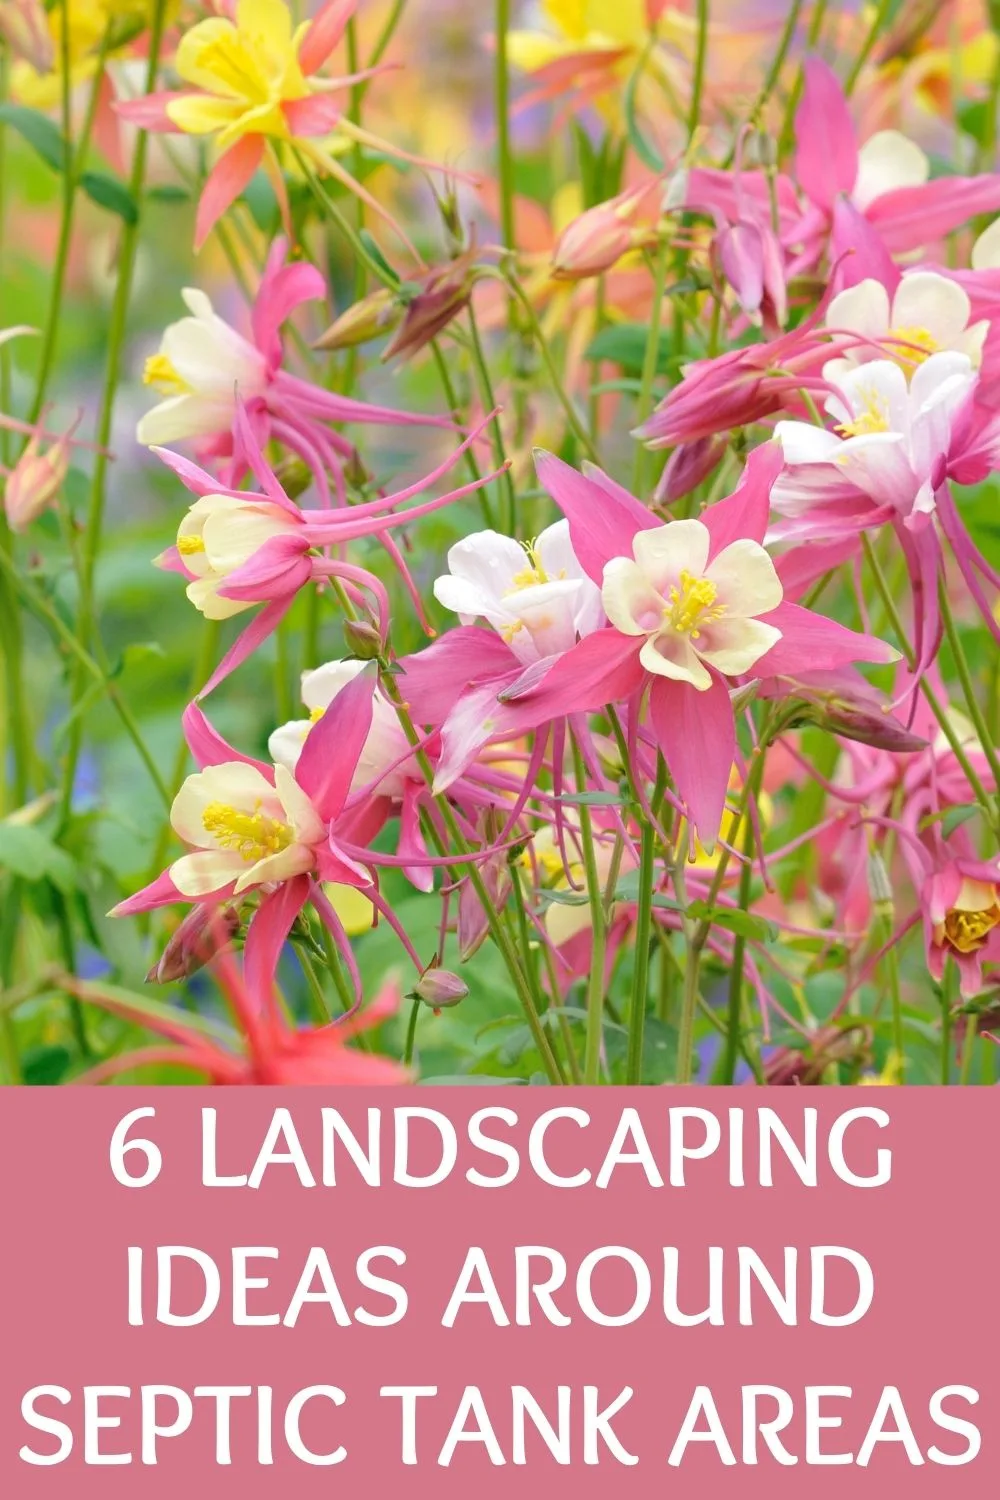 6 landscaping ideas around septic tank areas